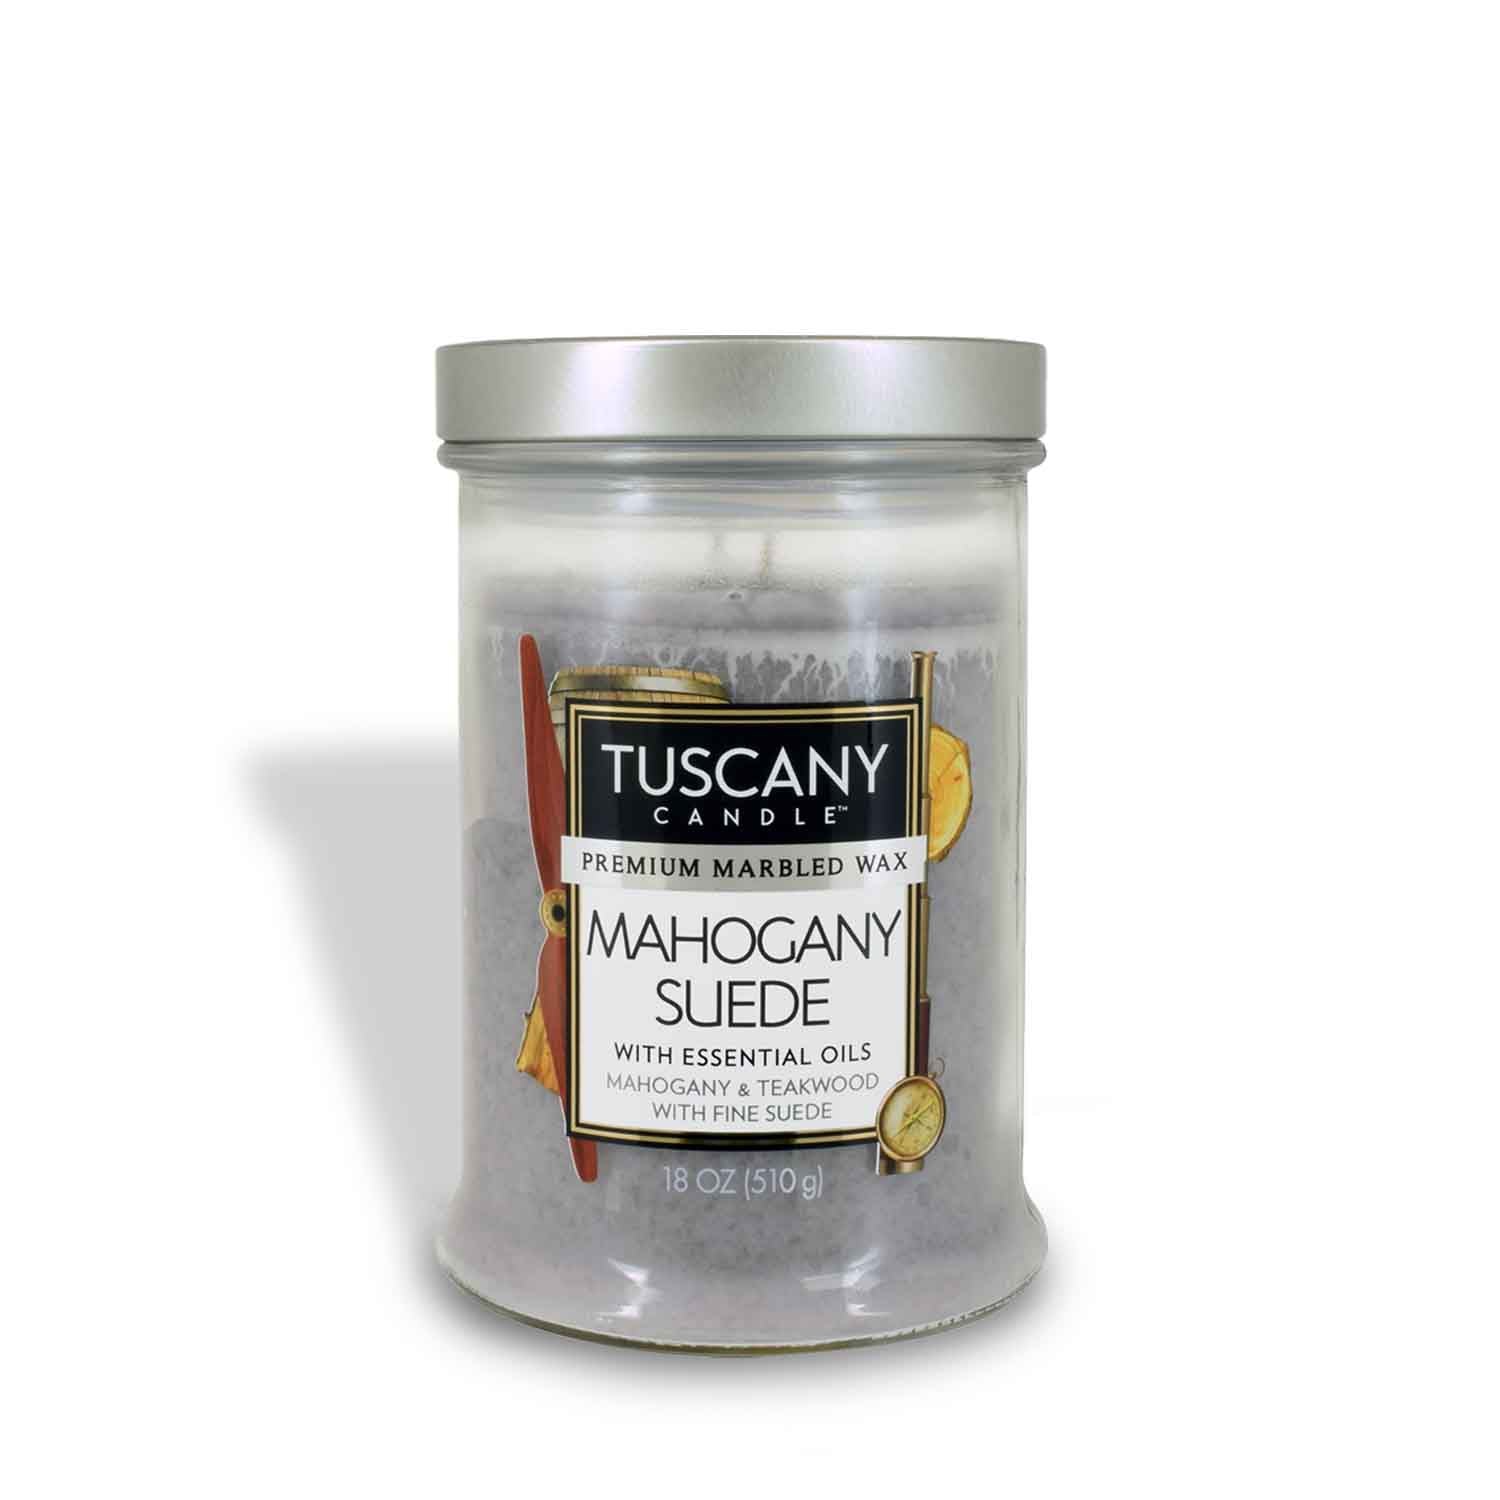 Mahogany Suede is a popular manly scented candle fragrance